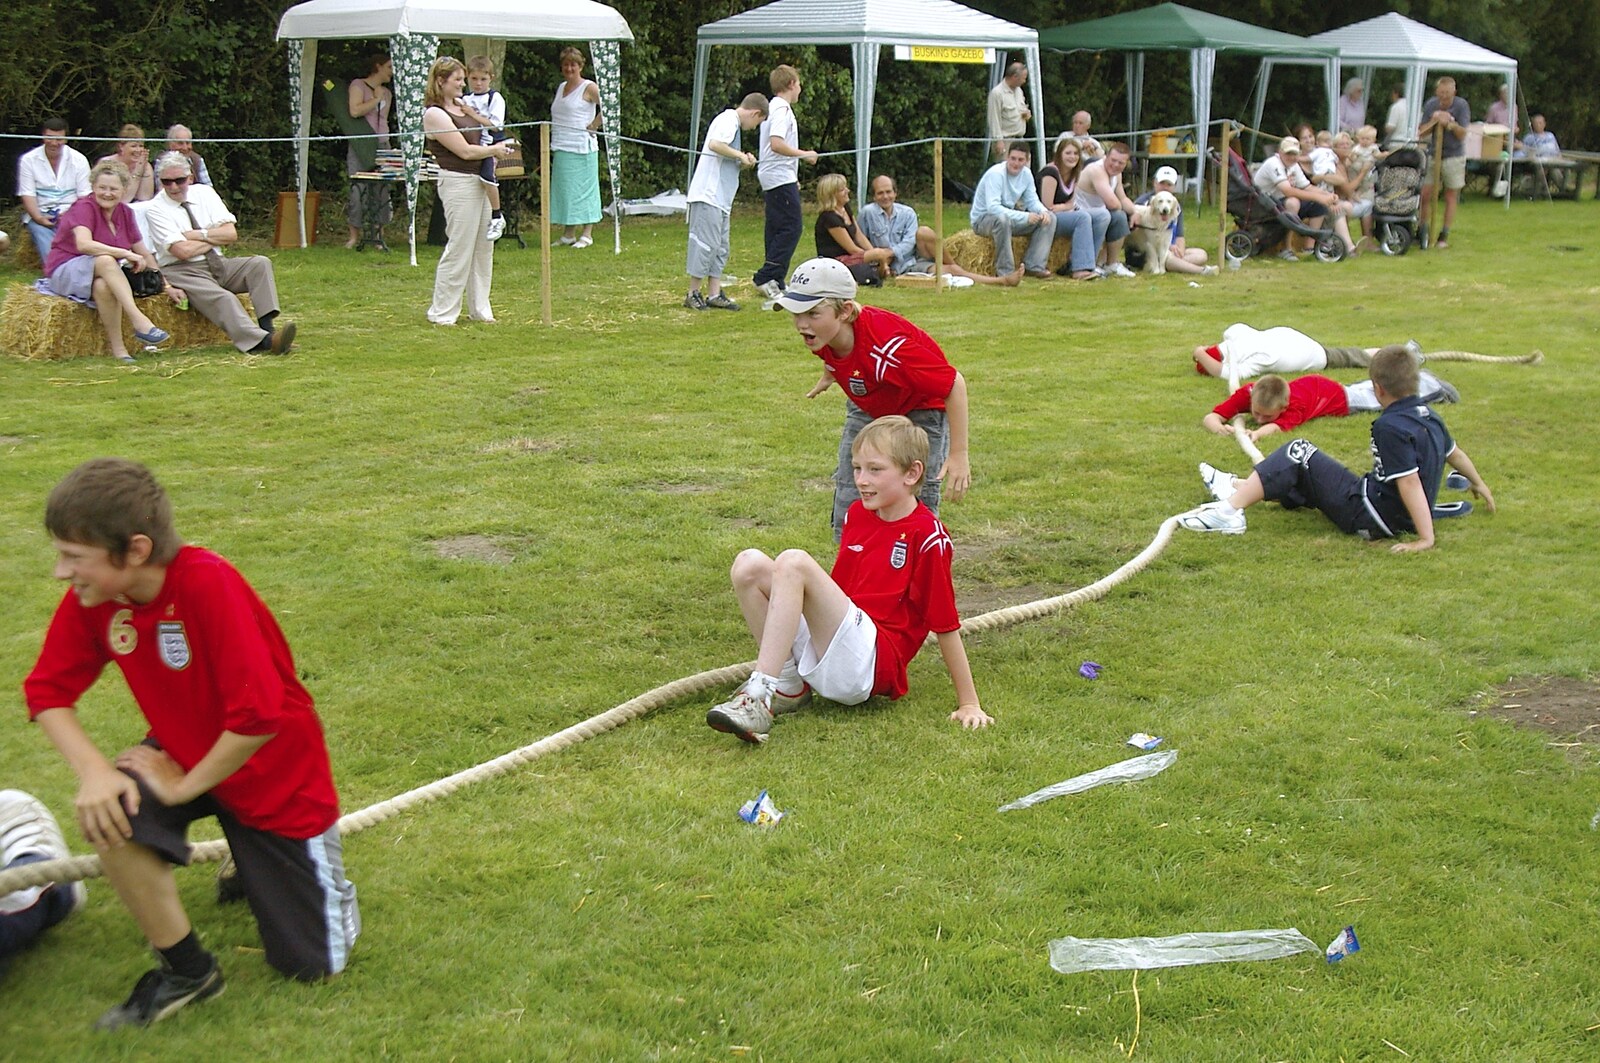 A team collapses from The Village Fête, Yaxley, Suffolk - 18th June 2006